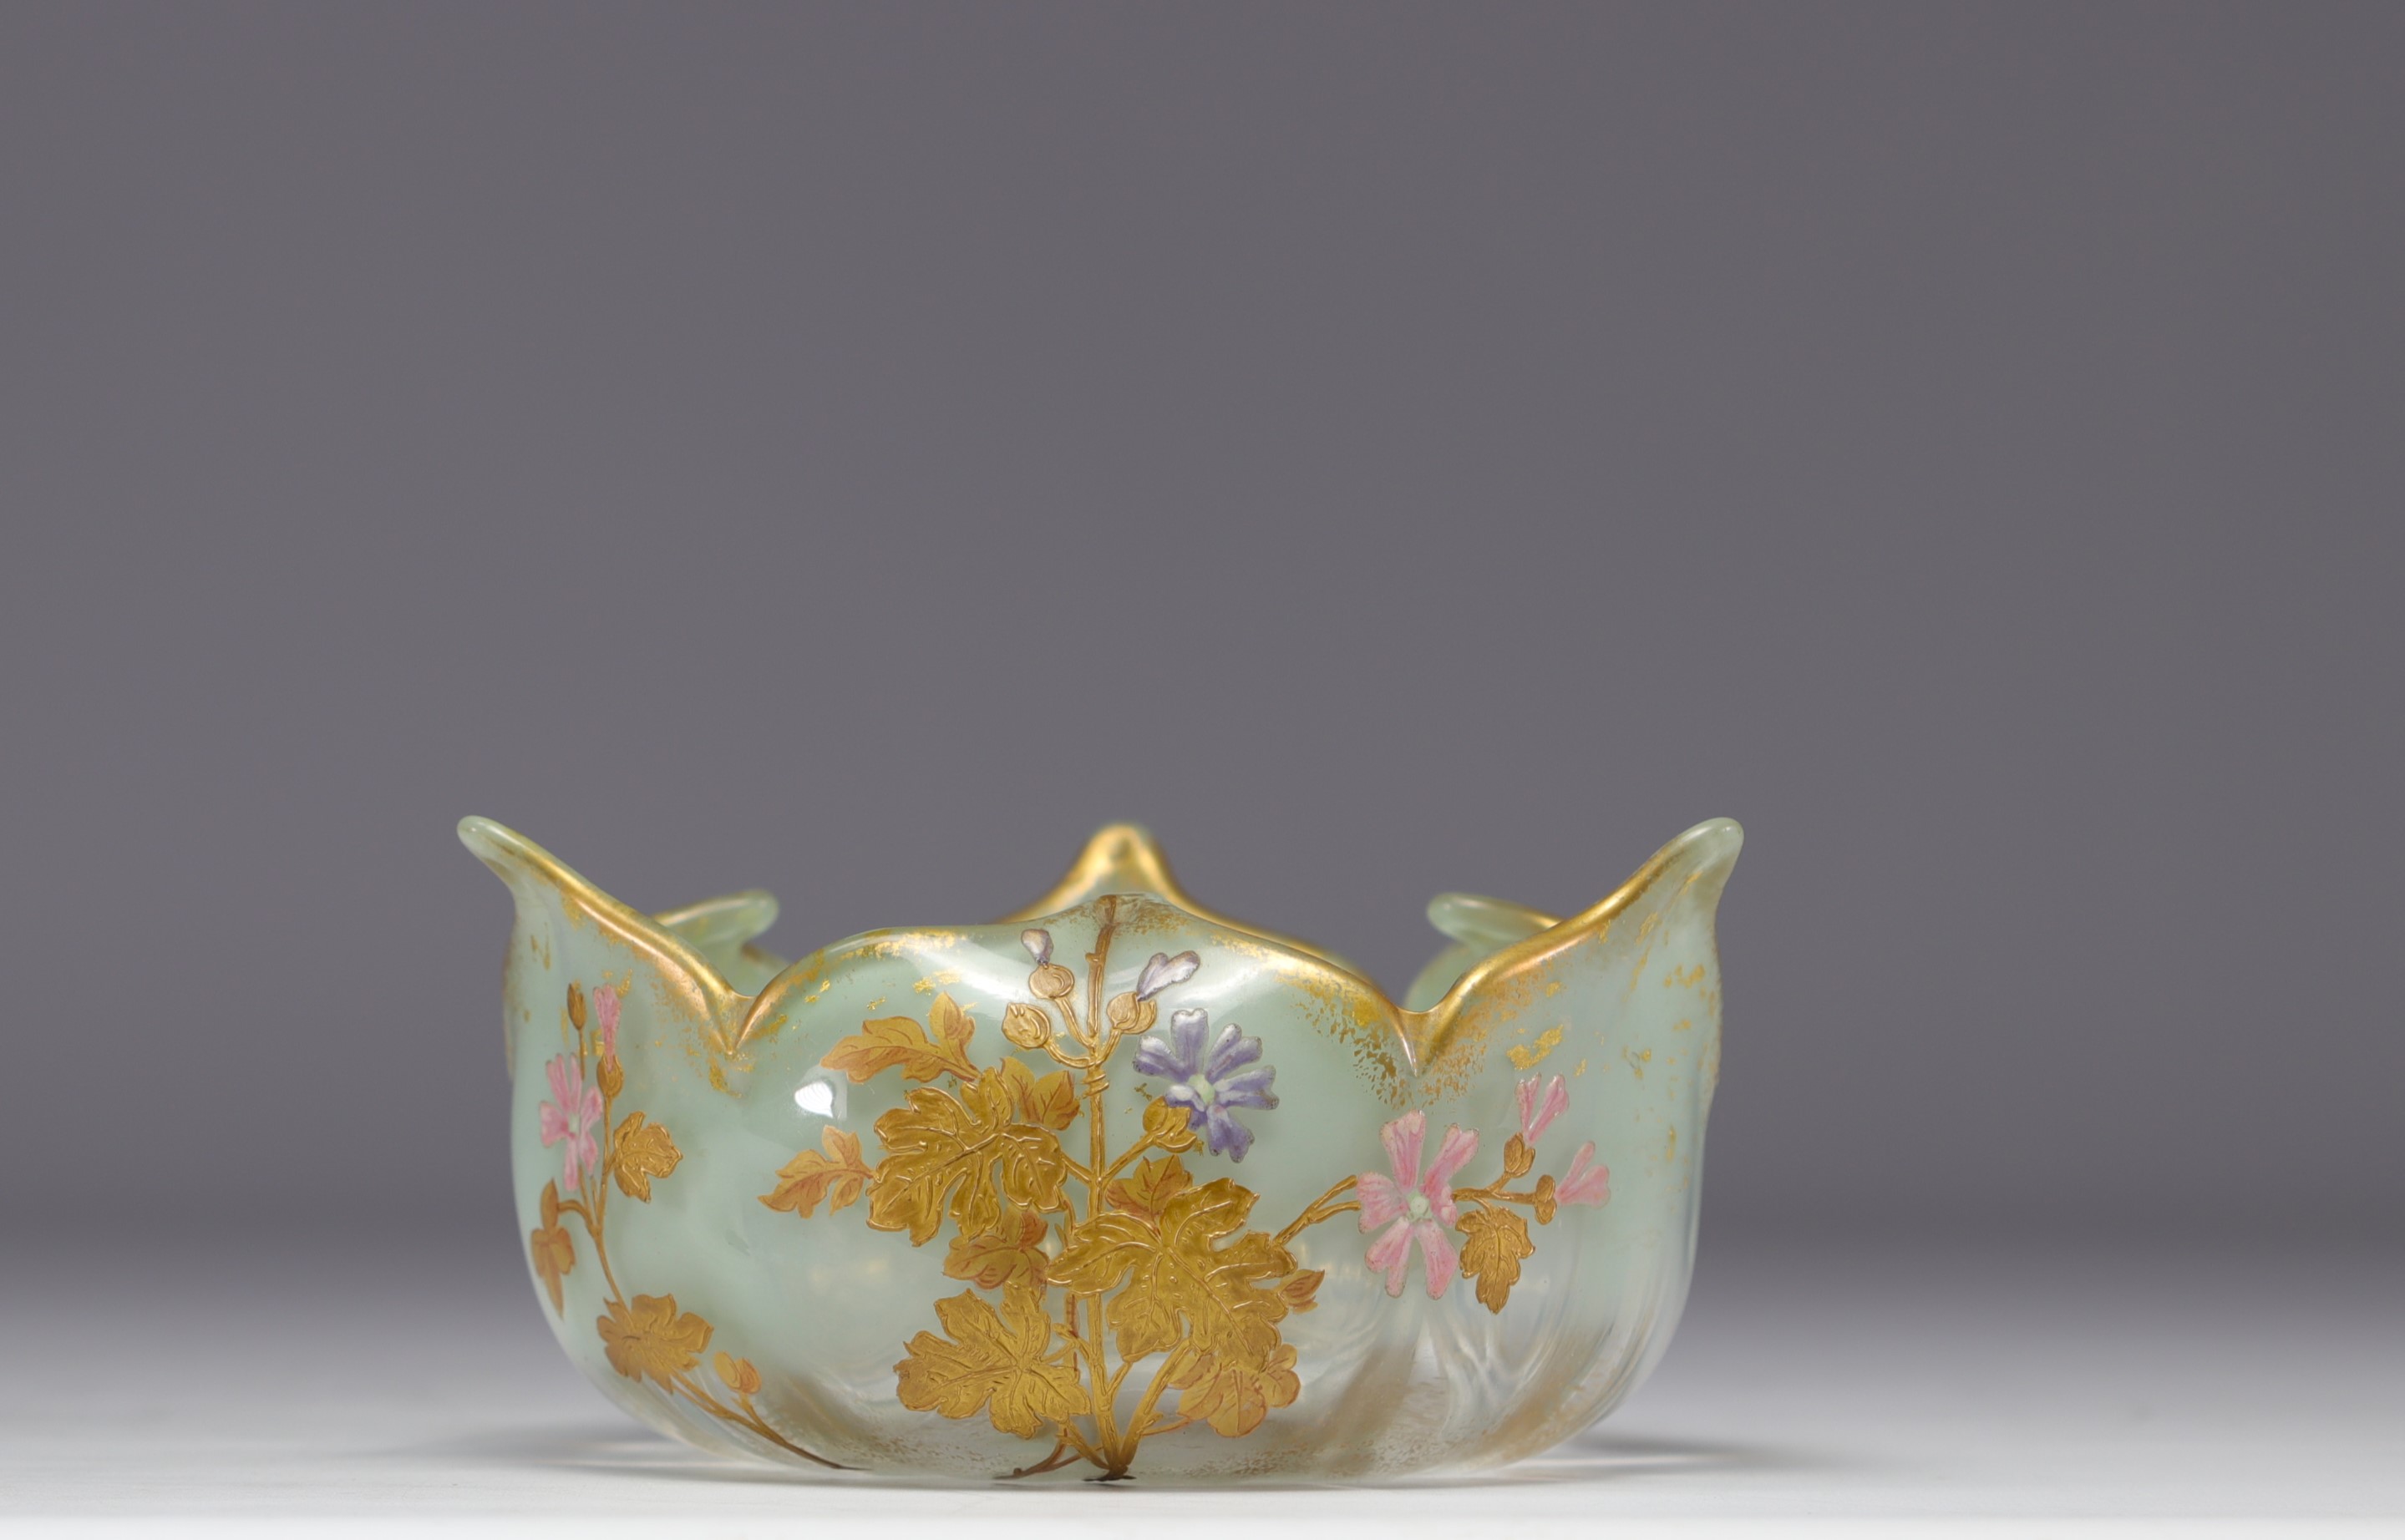 MONTJOIE, enameled three-lobed bowl with yellow and pink floral design on a green water background.